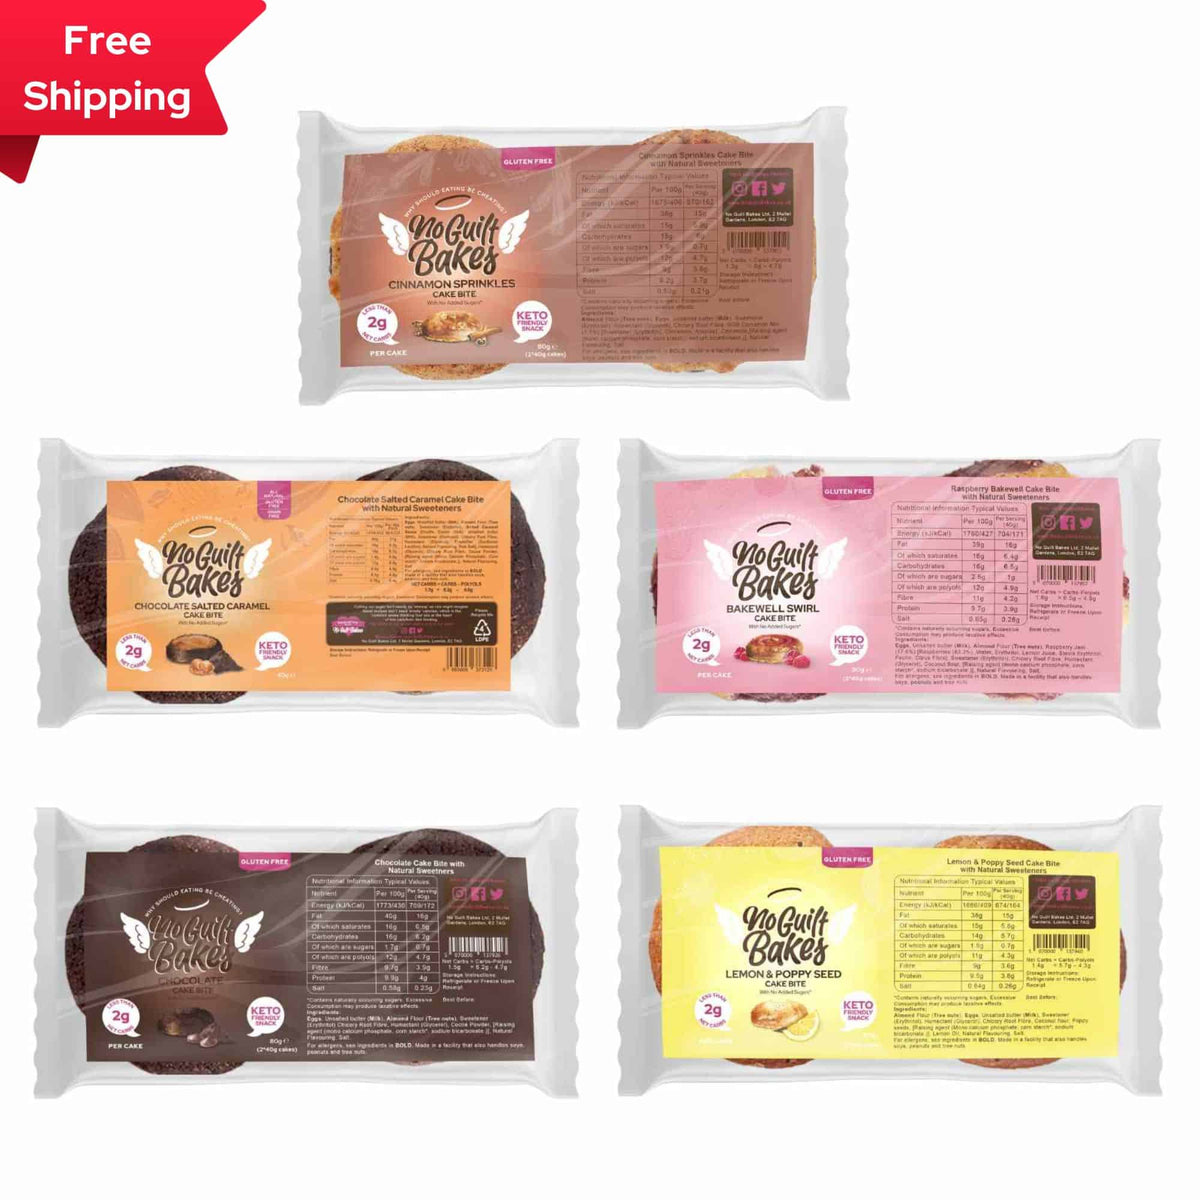 Four packages of Keto Cake Bites with free shipping available as a Variety Pack from No Guilt Bakes.